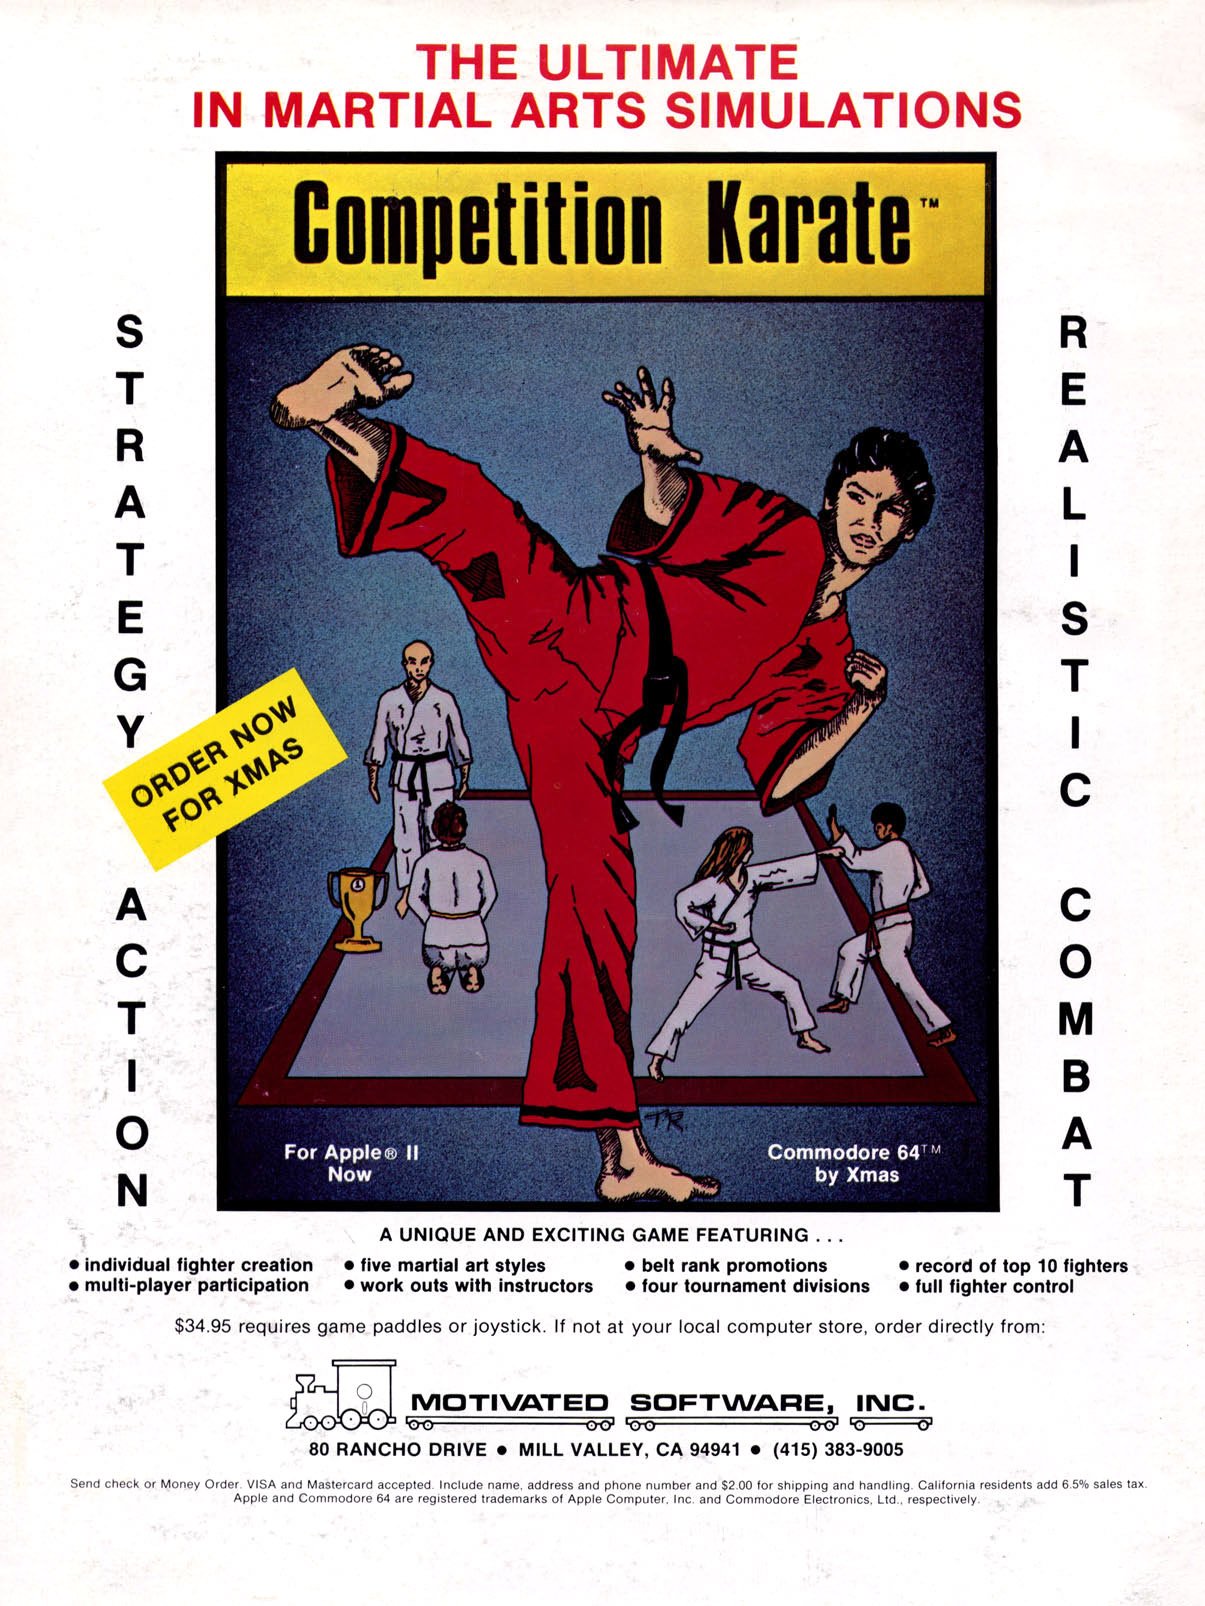 Competition Karate - Apple II - Retromags Community